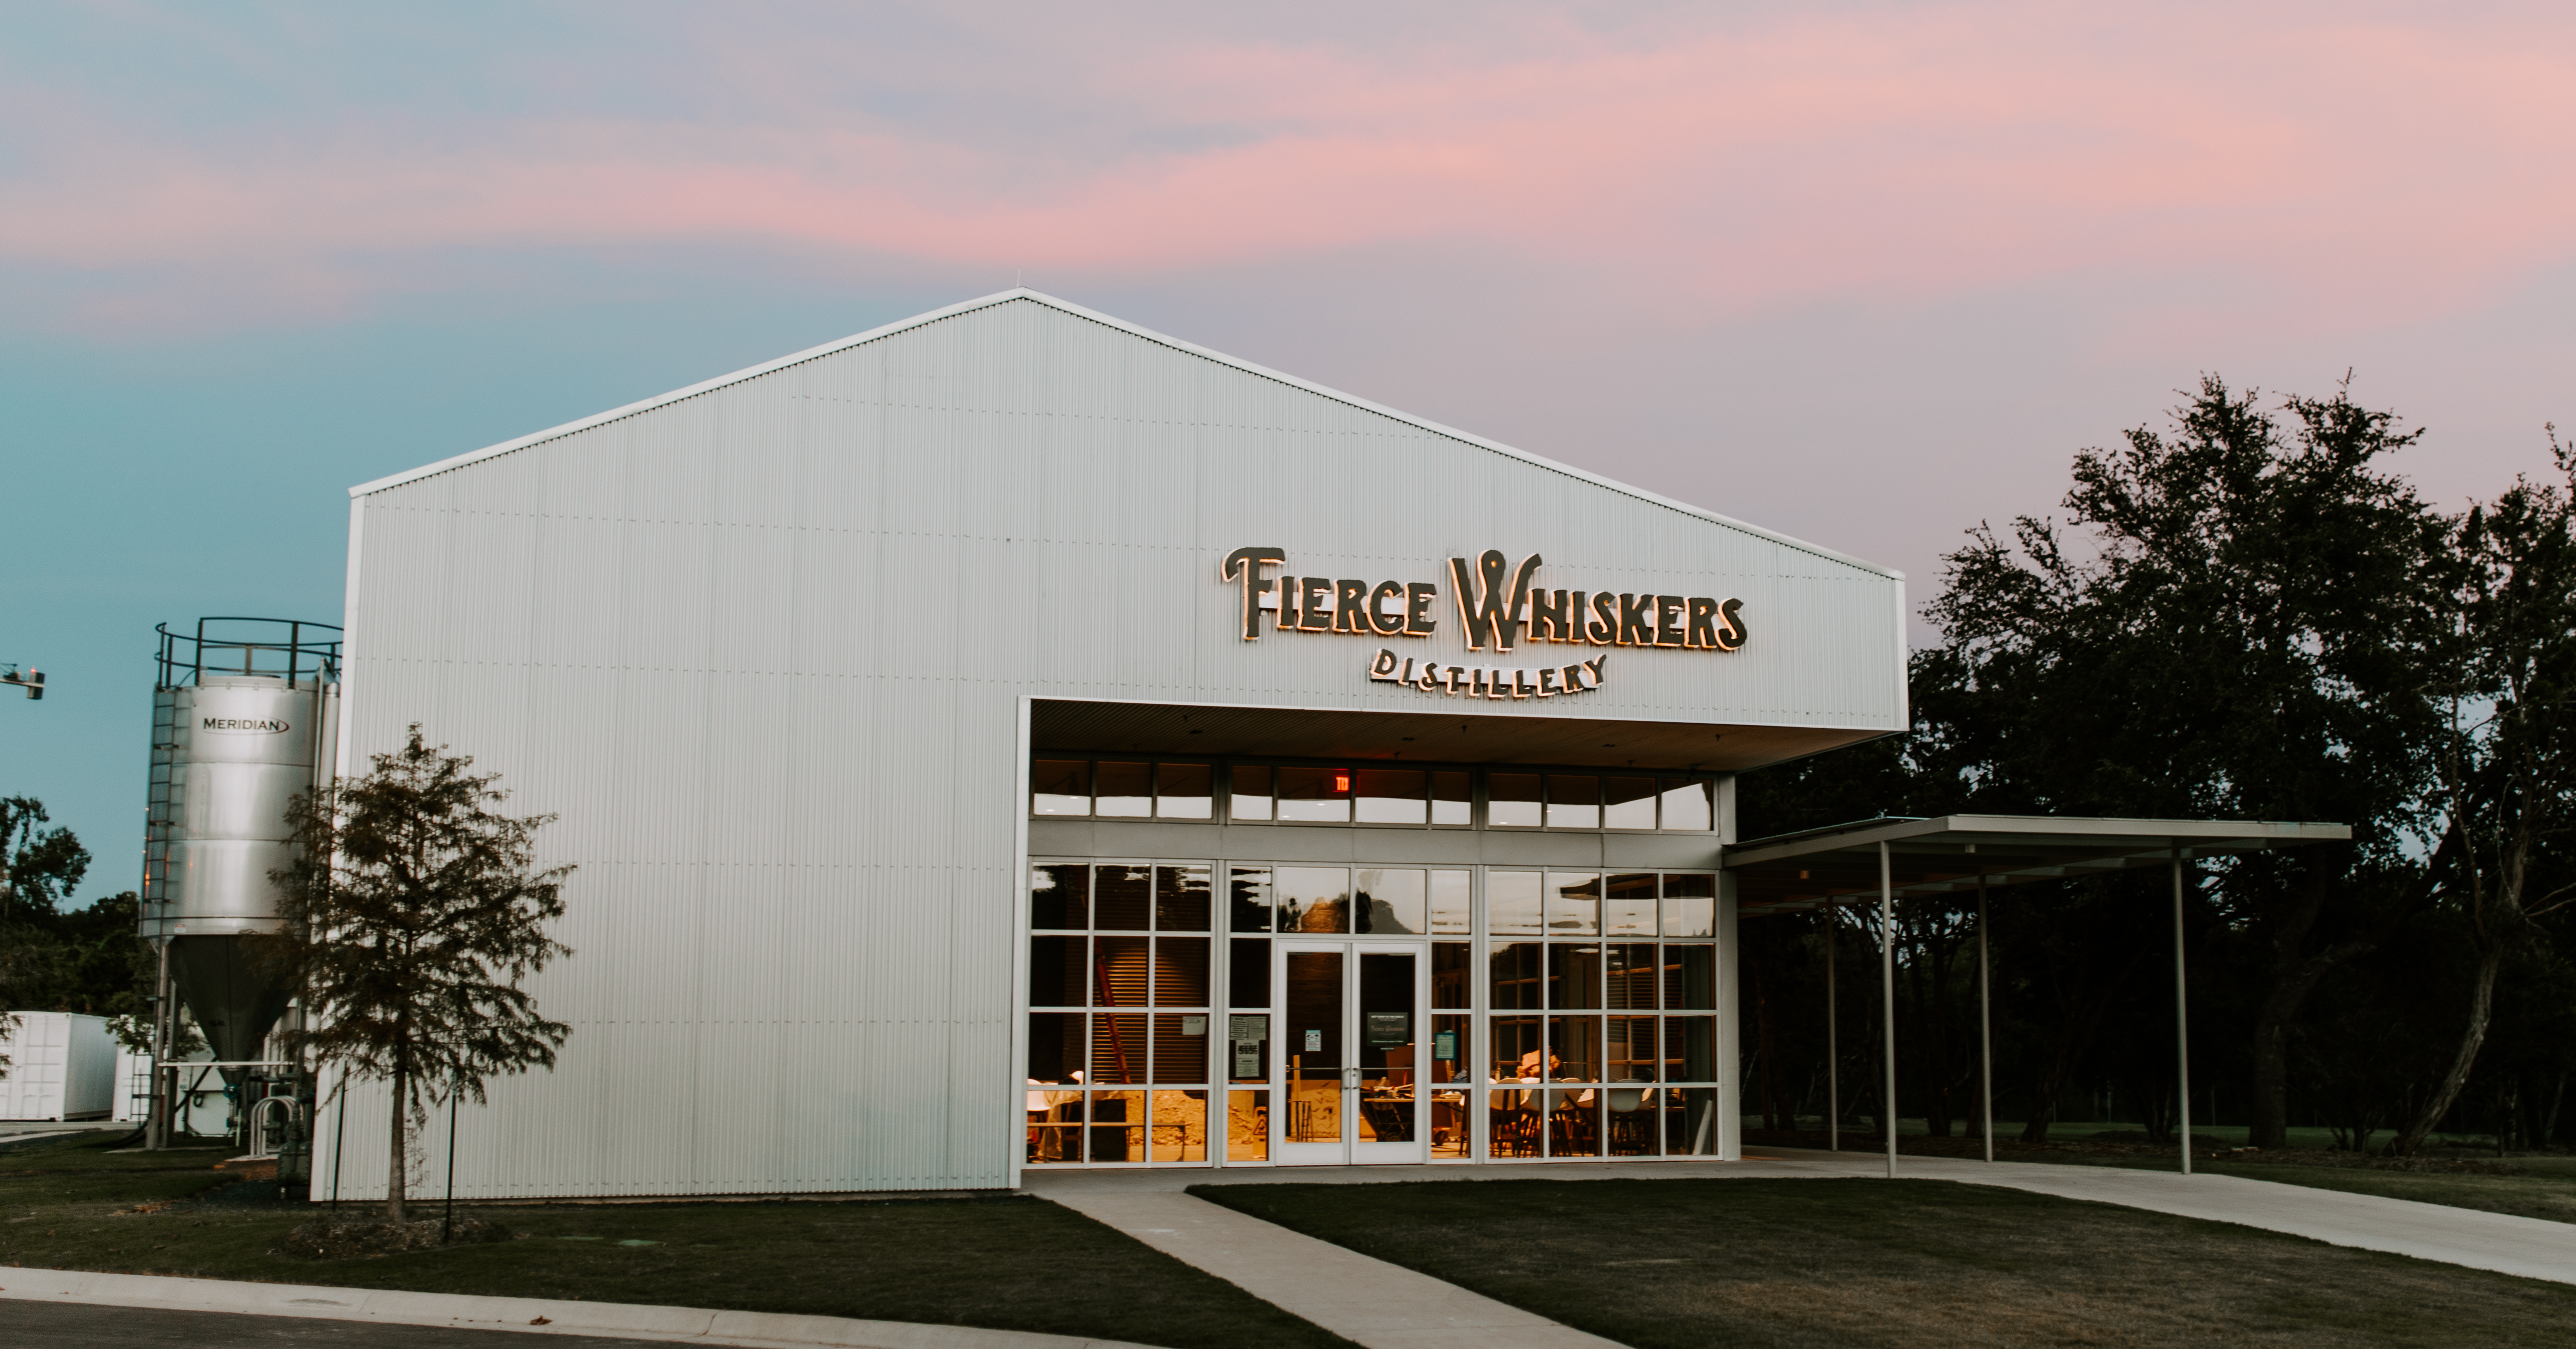 White building with Fierce Whiskers sign against a pretty sunset